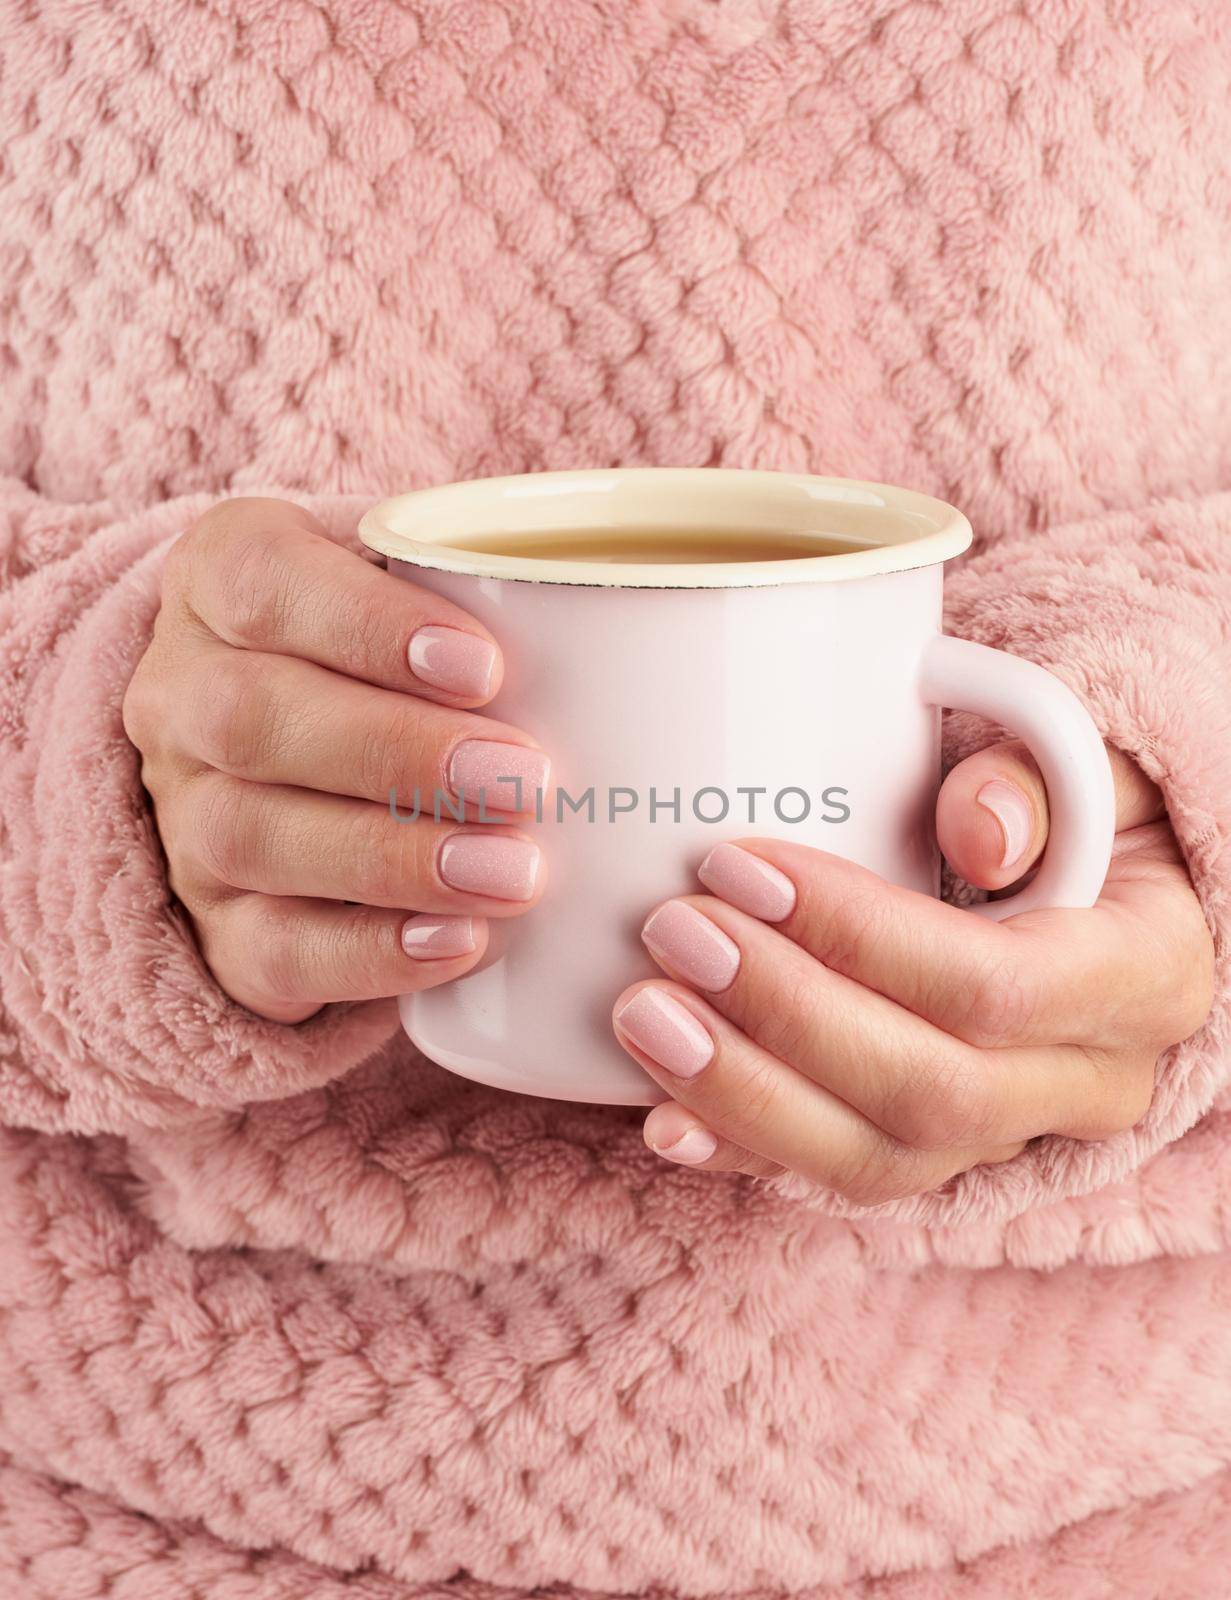 morning hot coffee on cold autumn morning, hands holding a mug with a drink, cozy atmosphere, vertical by NataBene